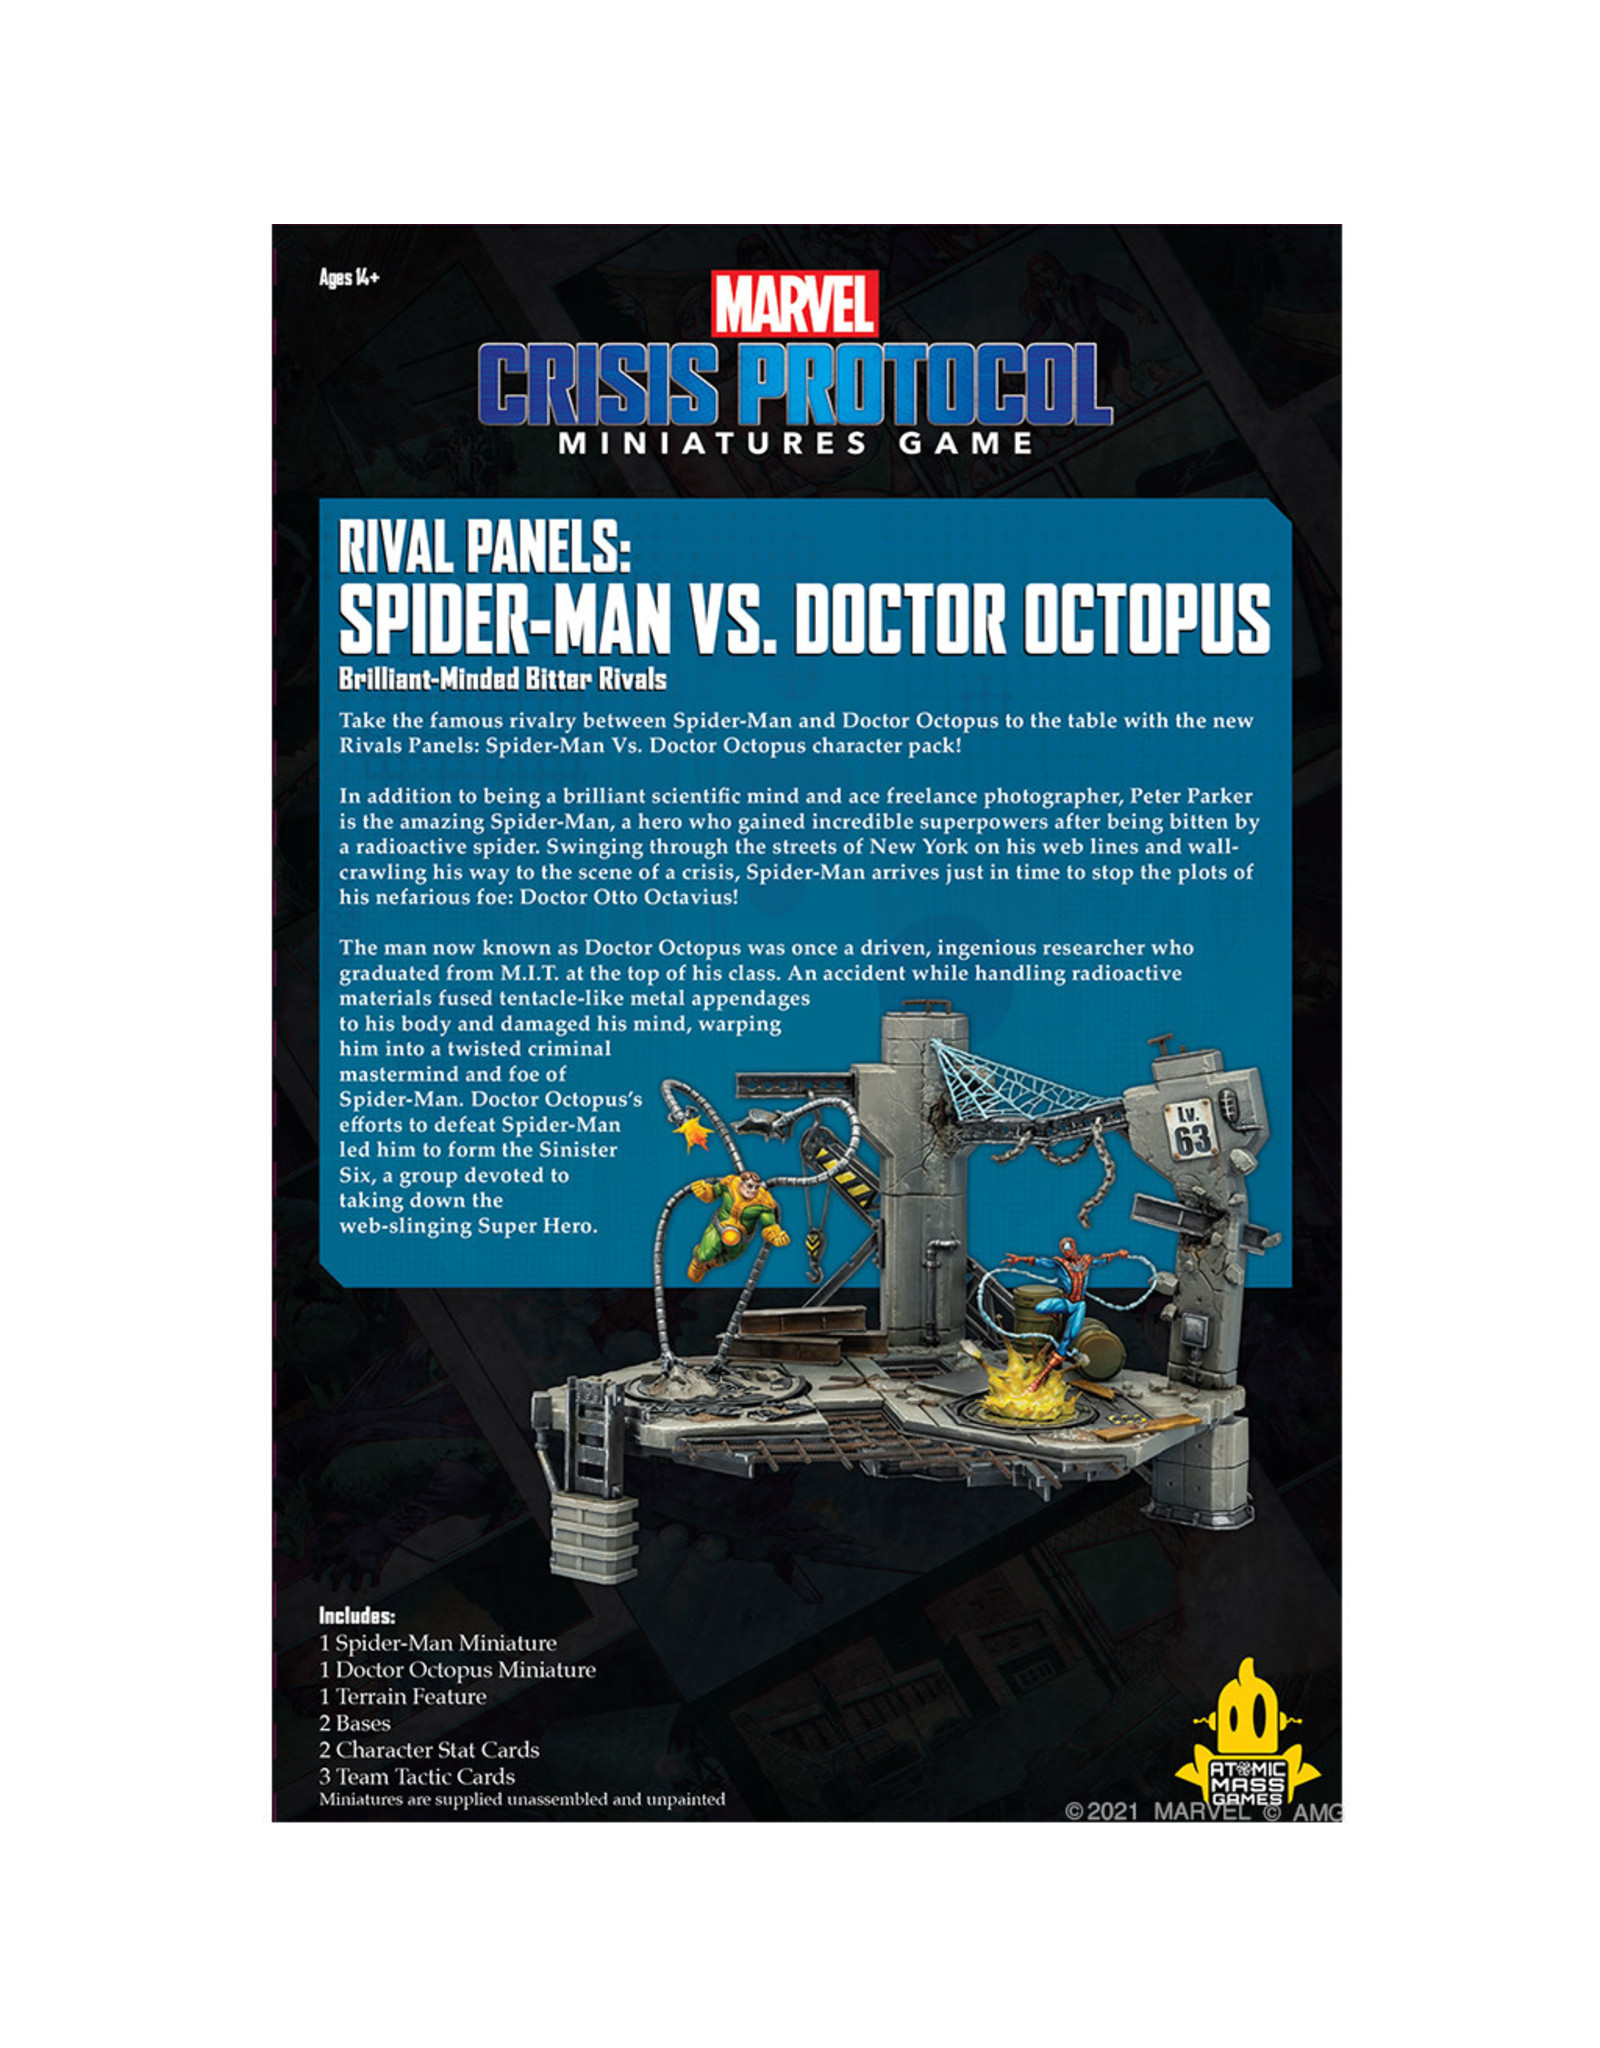 Atomic Mass Games Marvel: Crisis Protocol - Rival Panels - Spider-Man VS. Doctor Octopus